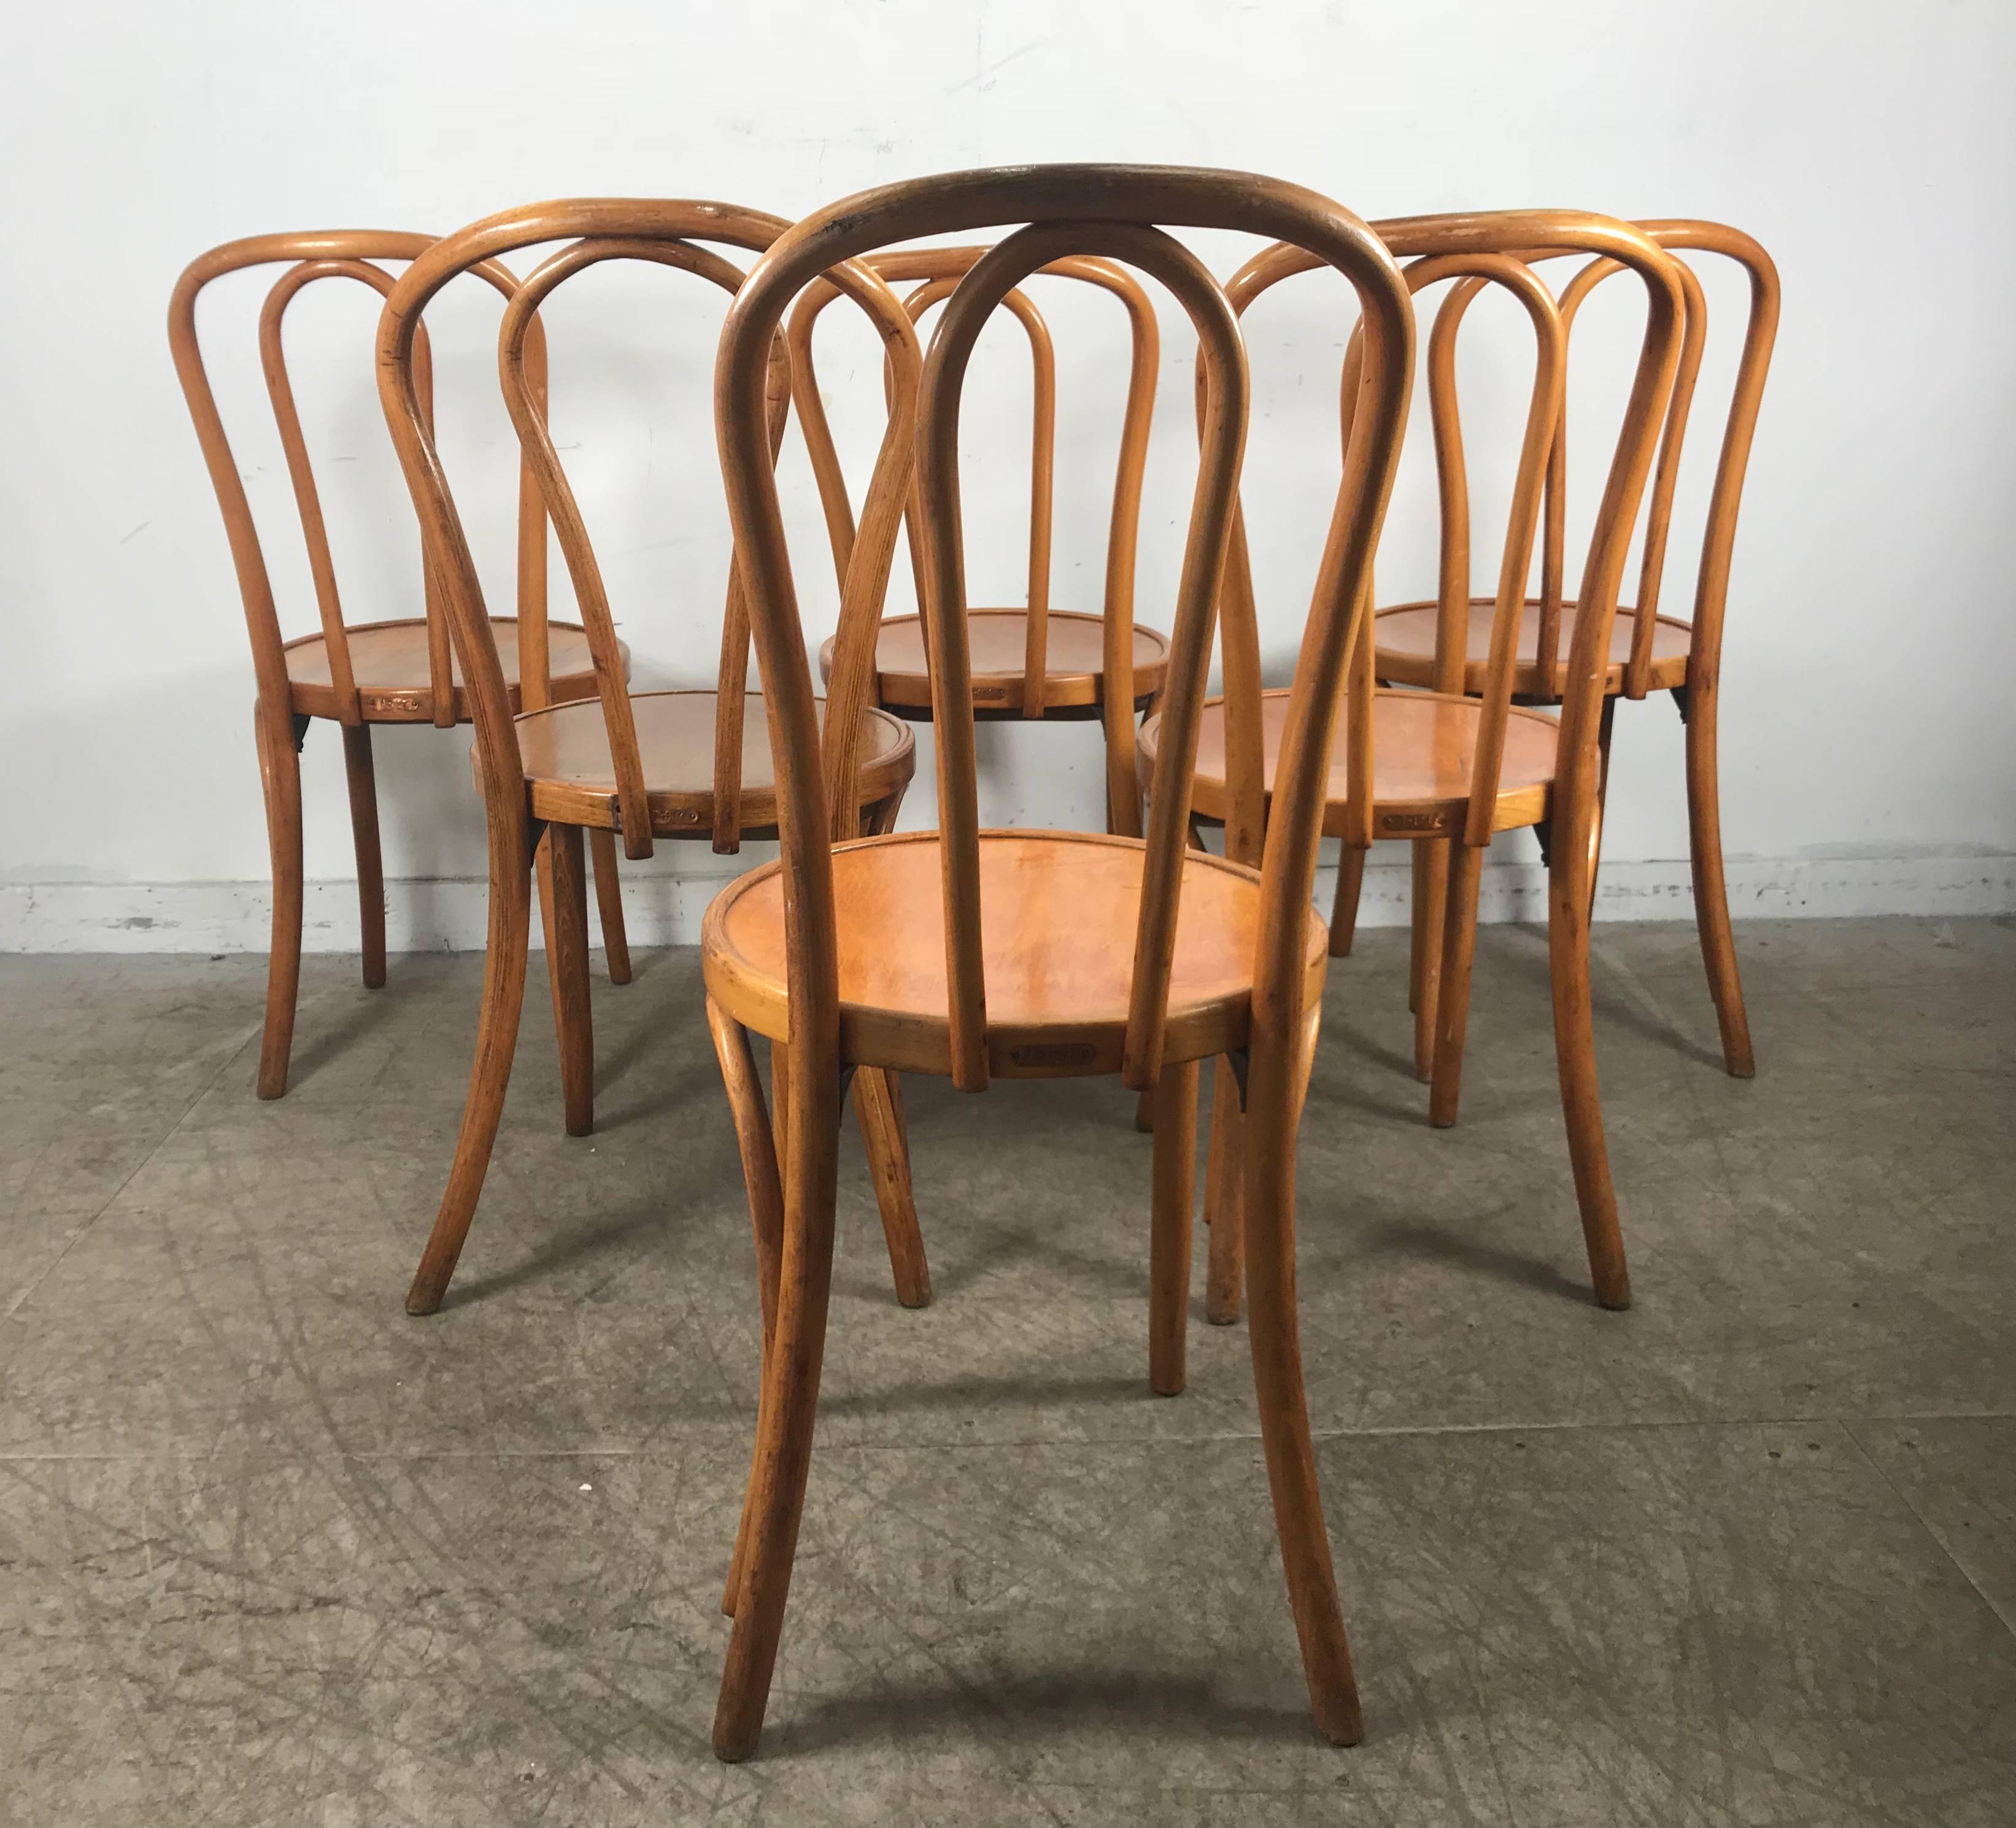 Set of Six Classic American bentwood side chairs by Thonet New York, nice set of six matching chairs, retain original finish. Wonderful warm honey blond color and patina.The model no. 18 is a version of the world's famous Classic Thonet coffeehouse